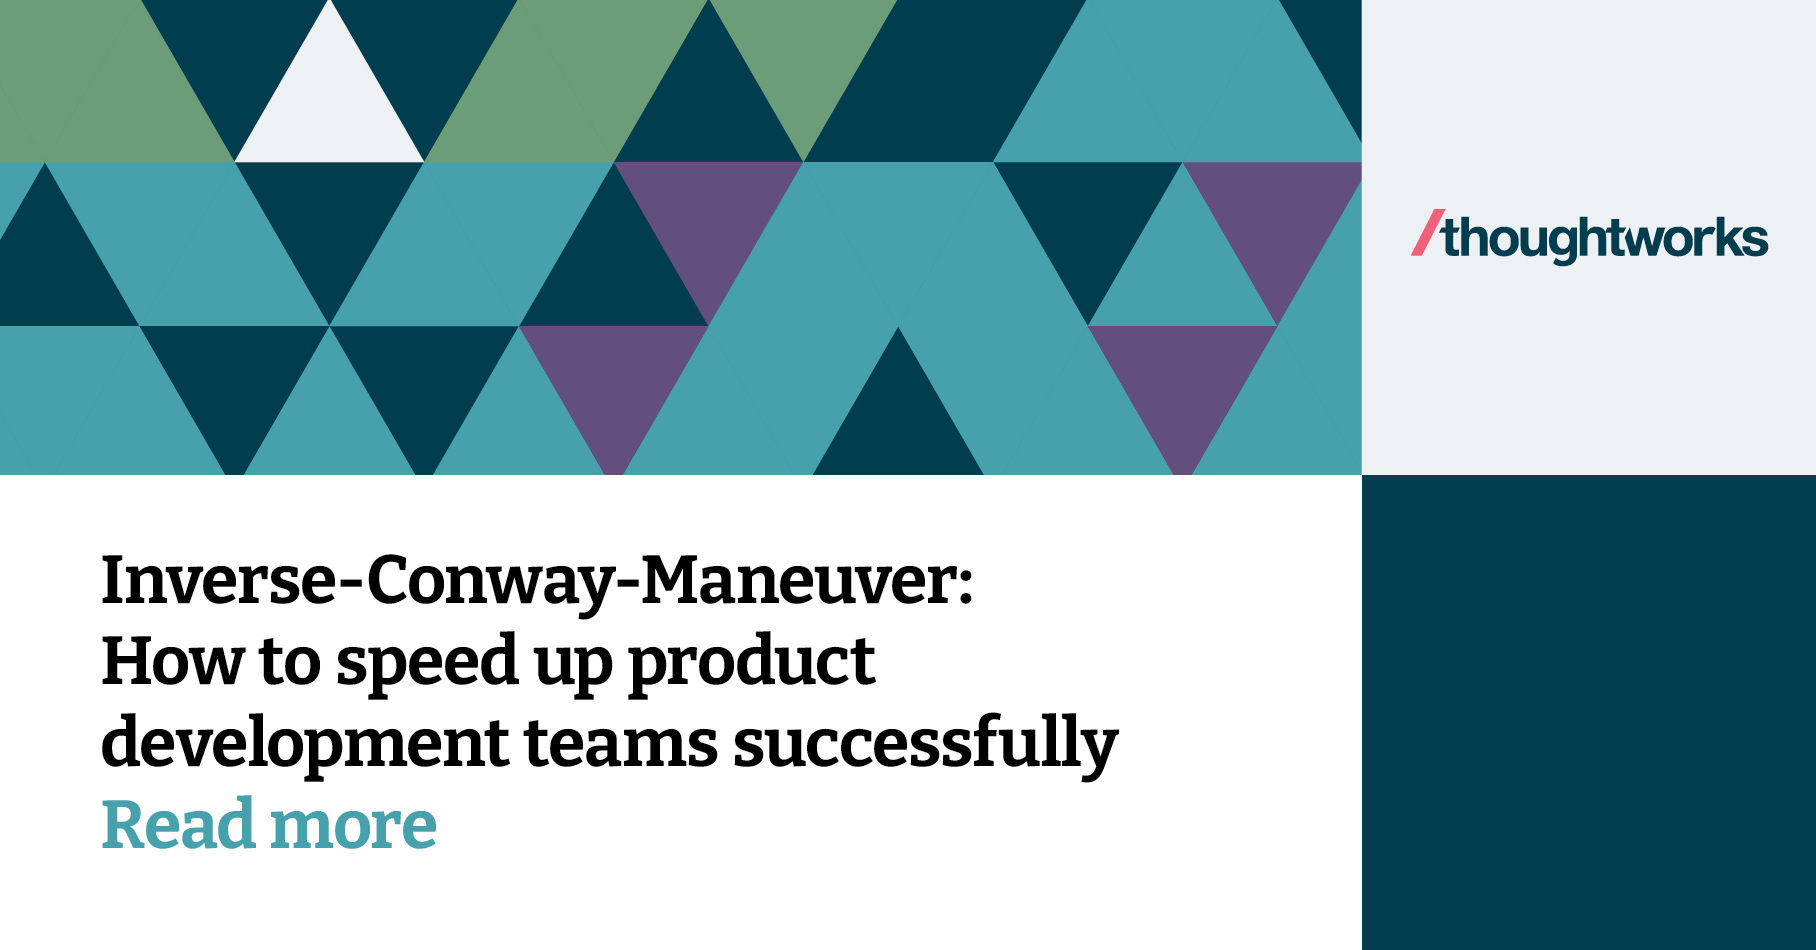 Thumbnail of Inverse-Conway-Maneuver: How to speed up product development teams successfully